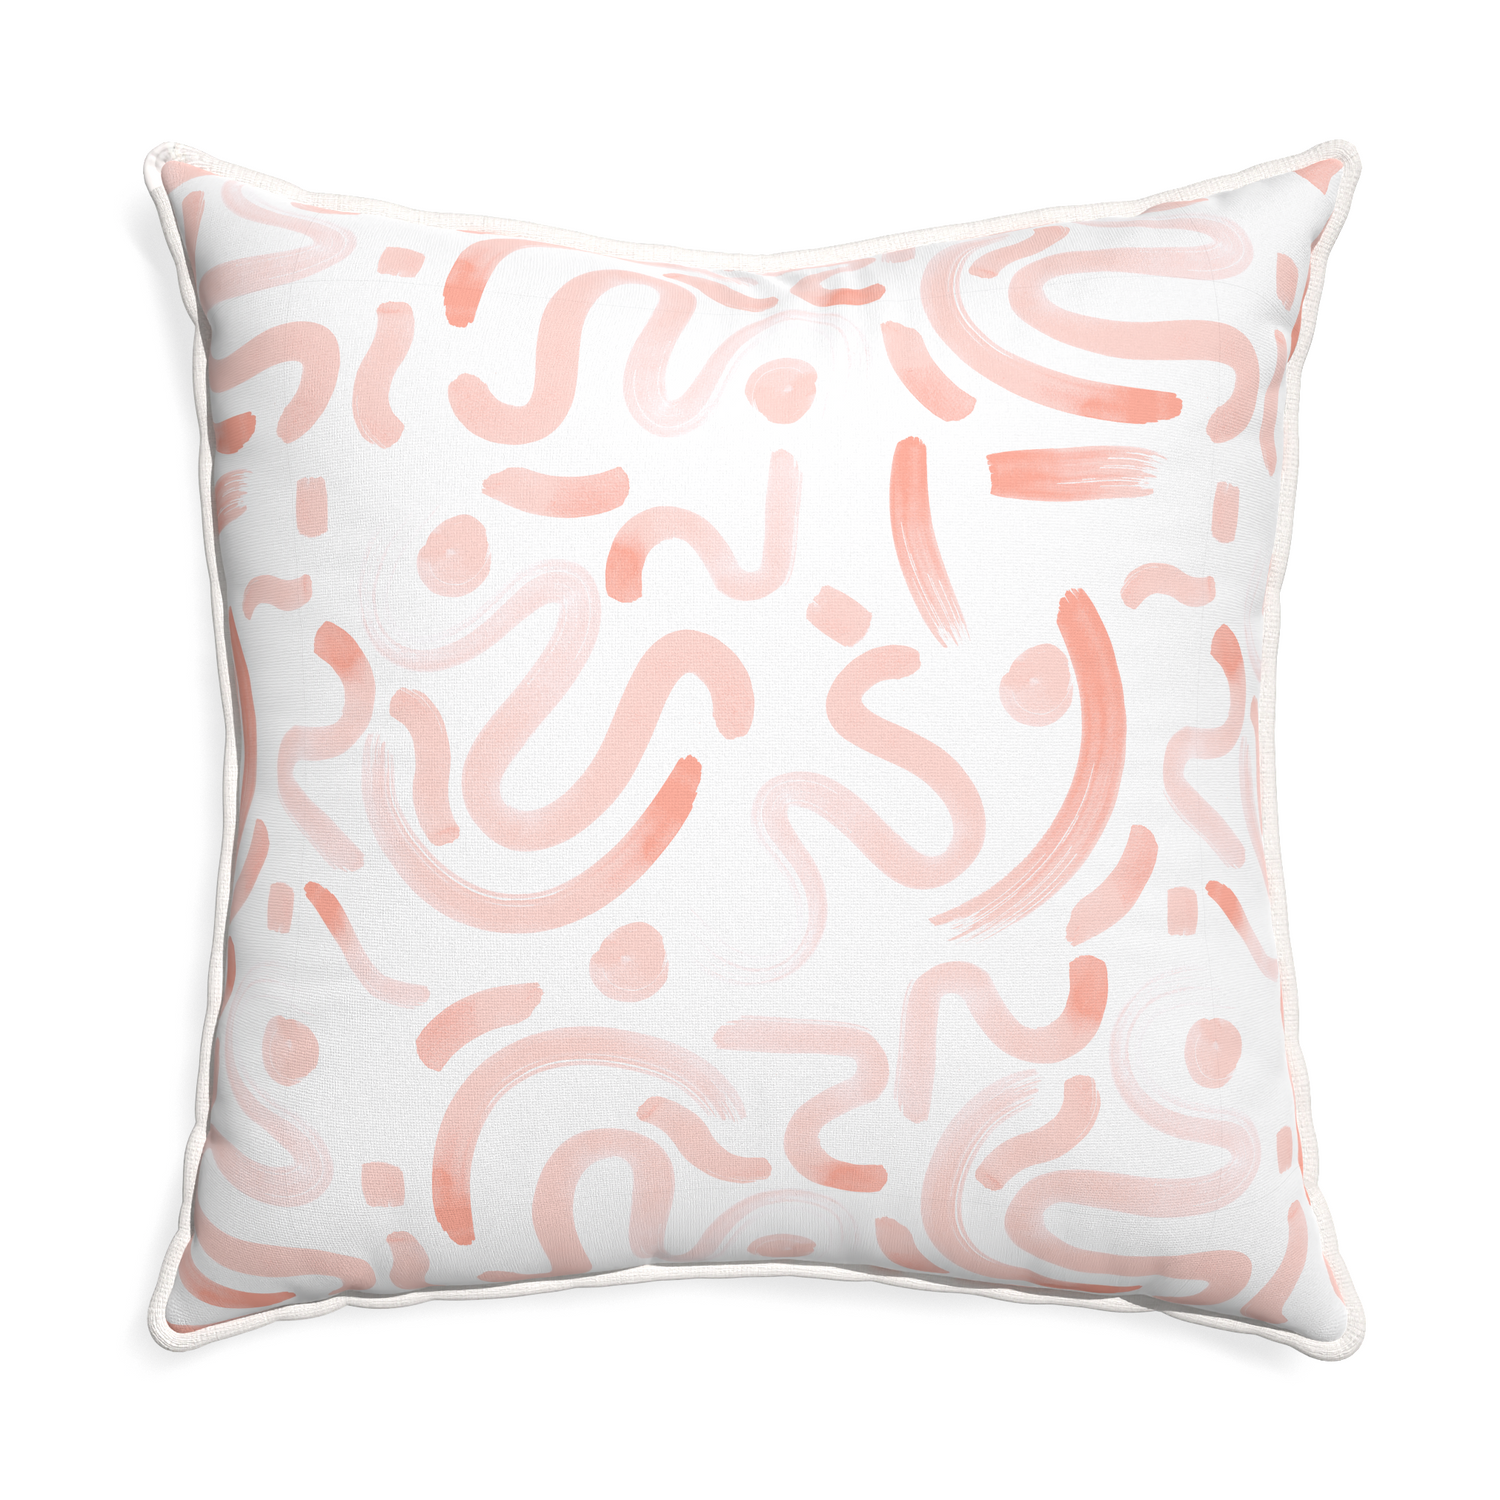 Euro-sham hockney pink custom pink graphicpillow with snow piping on white background